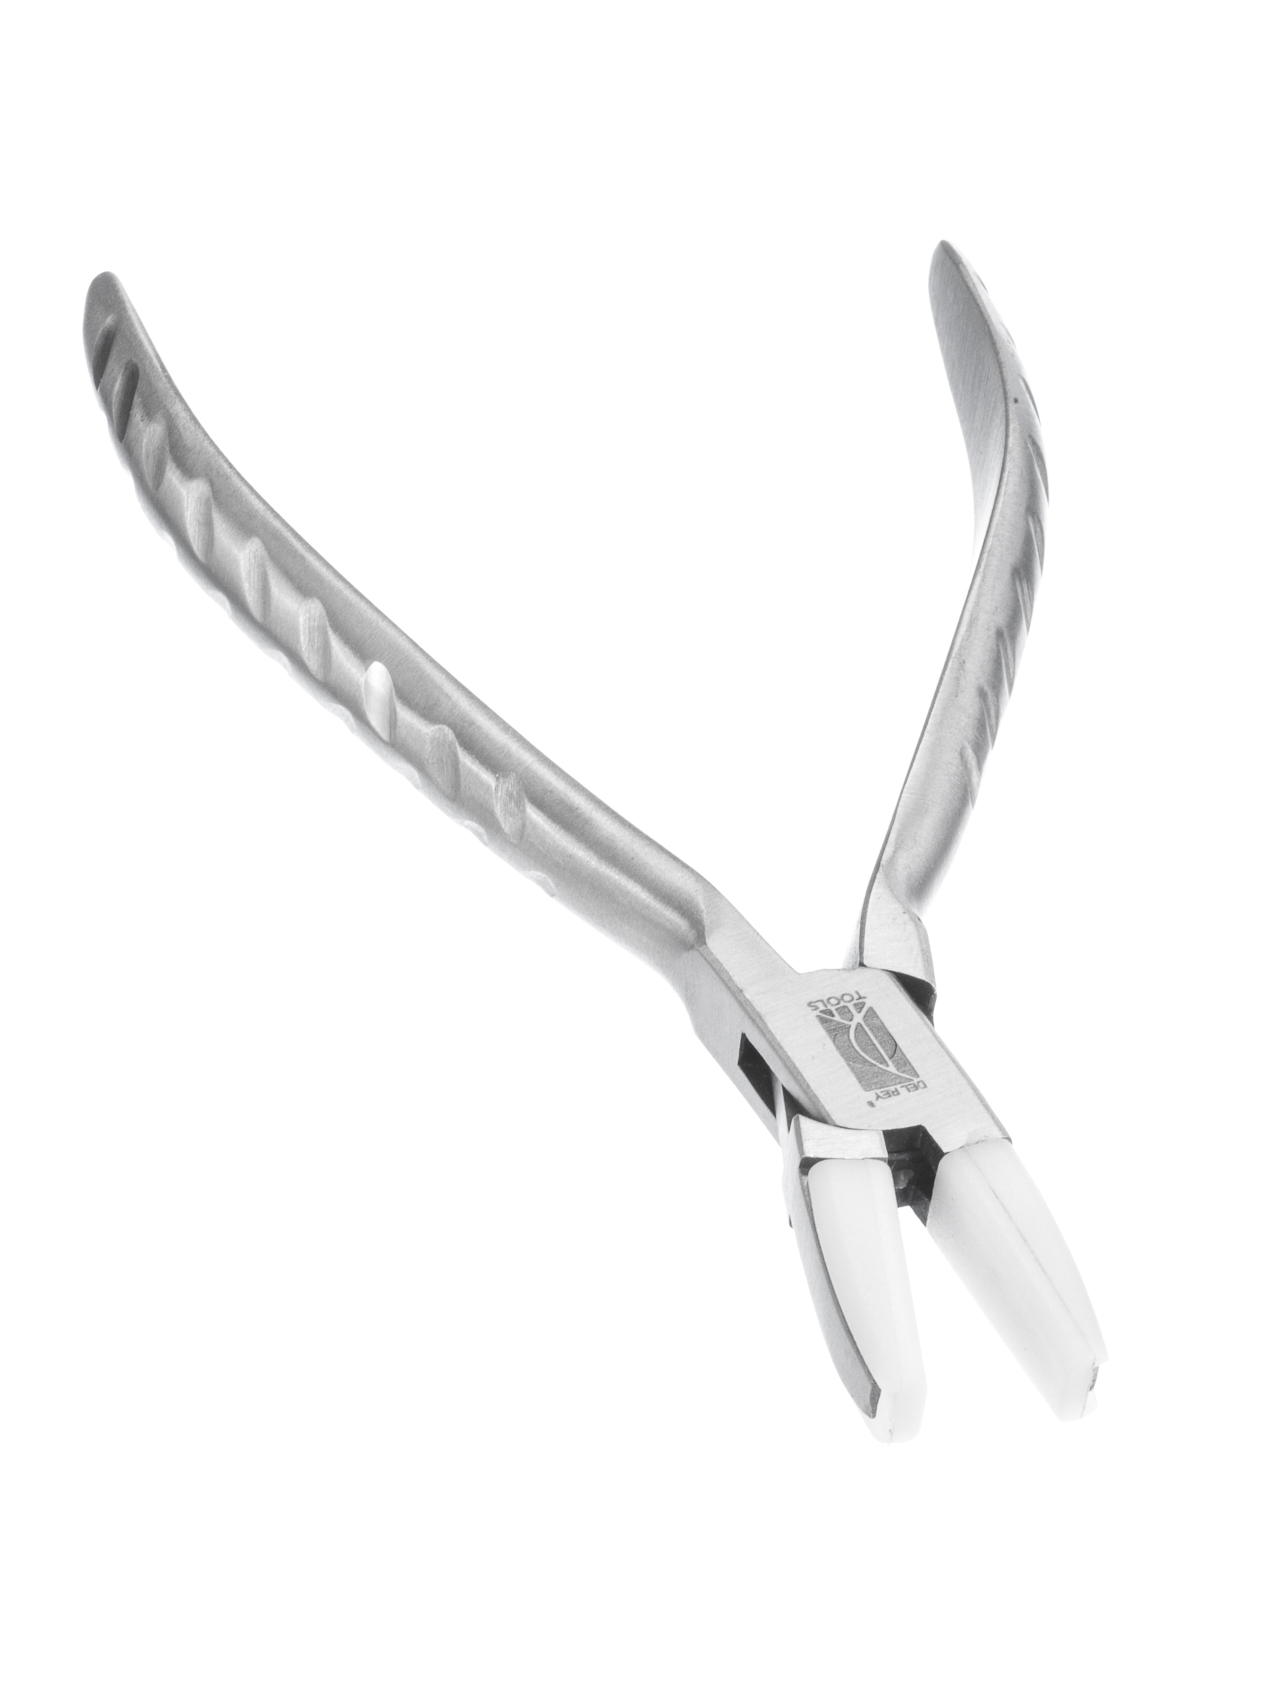 Details about   Modelcraft Box Joint Flat Nose Smooth Pliers 115 Millimetre Smooth Jaws 